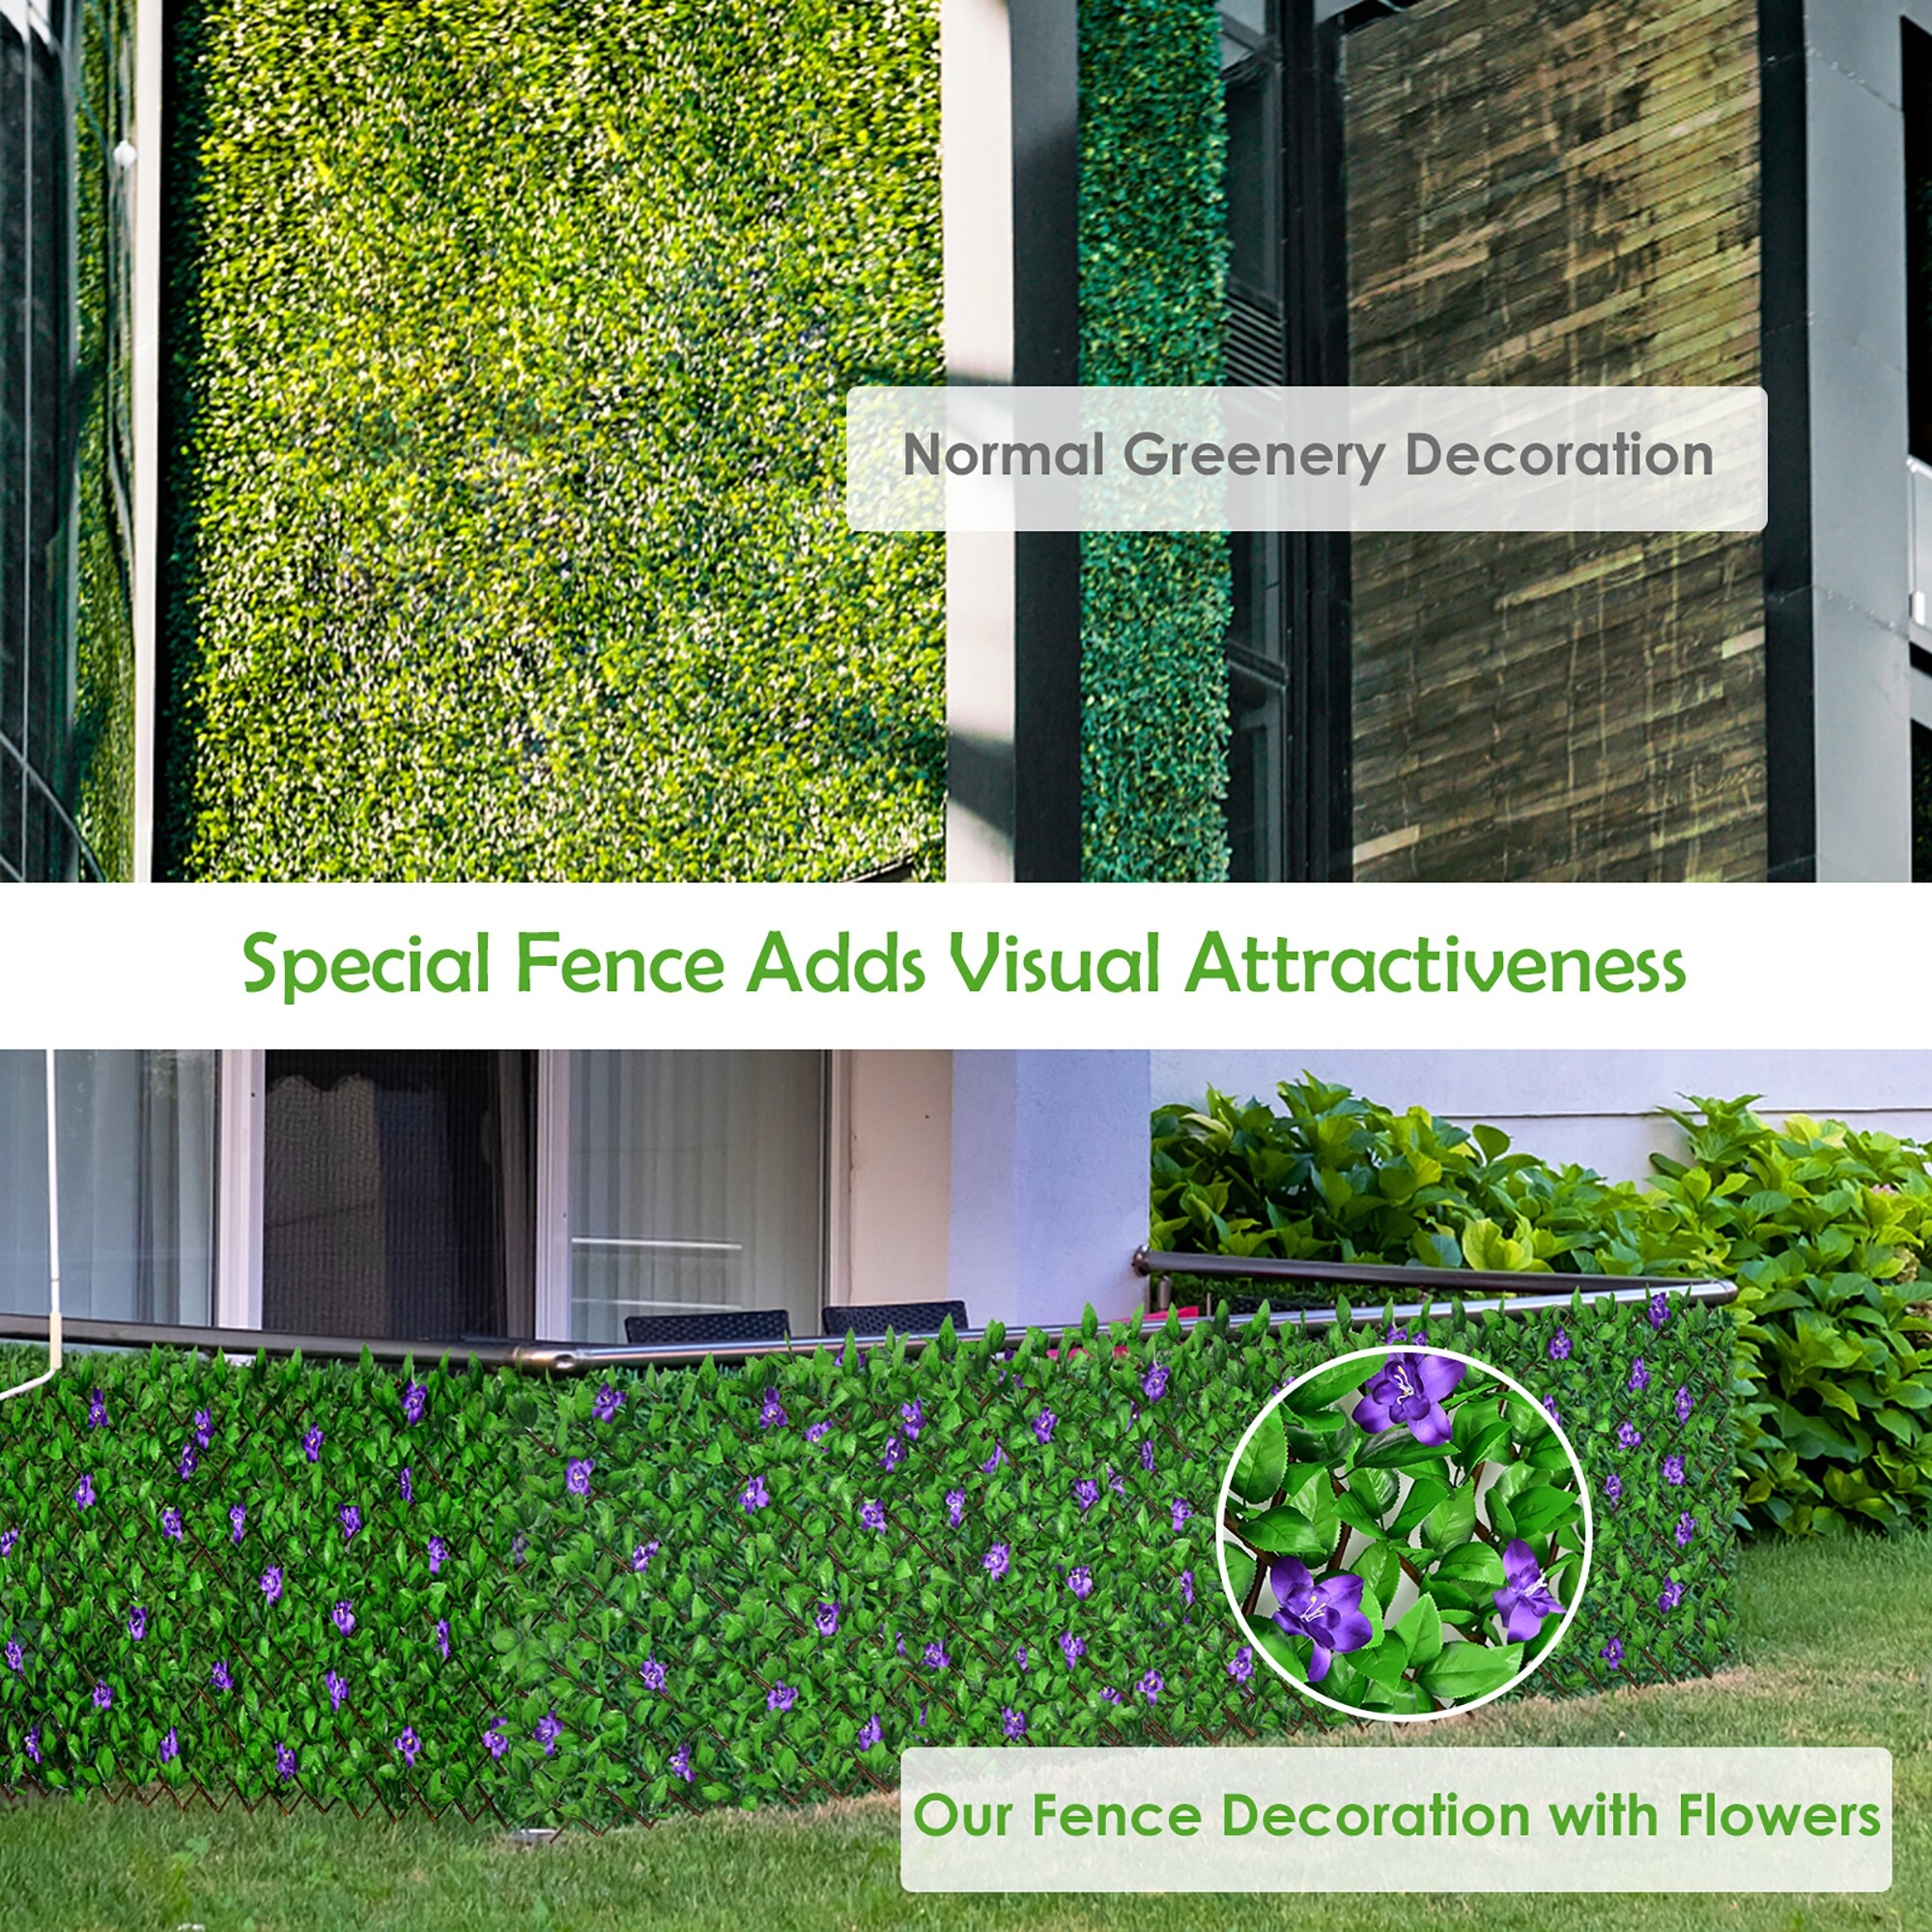 Expandable Fence Privacy Screen Faux Ivy Panel w/White Flower - On Sale - Bed Bath and Beyond